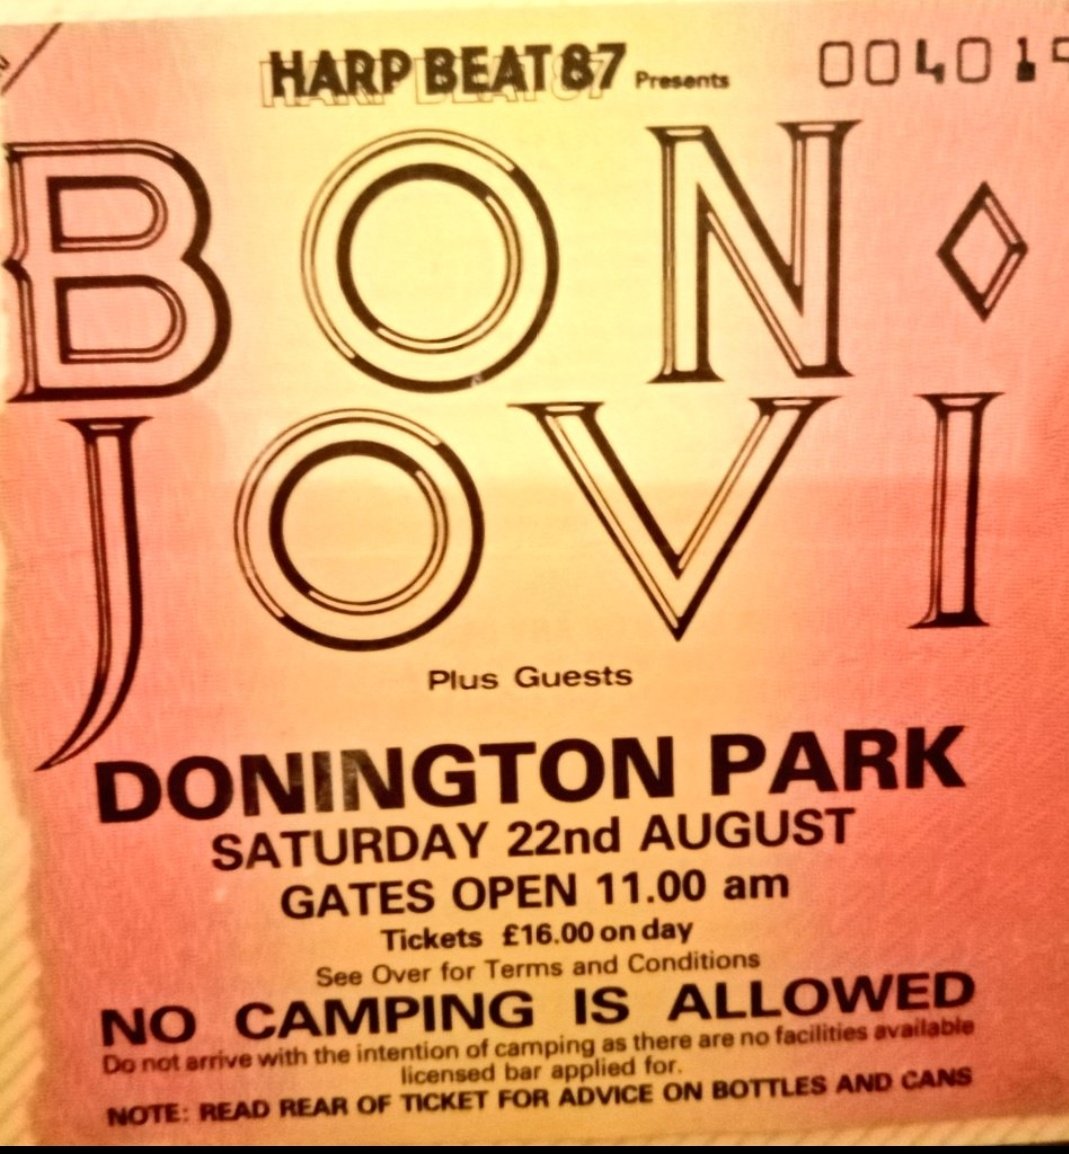 Saw @BonJovi at Donington 🇬🇧 in 1987 & proved what a monster the album Slippery When Wet was. We're An American Band an apt song to close out the day but to be honest I was caught in a mosh pit. 😉 @mitchlafon @BerserkerBill @RockTheseTweets @marillion073 @TheDuckLR @TTFTPR